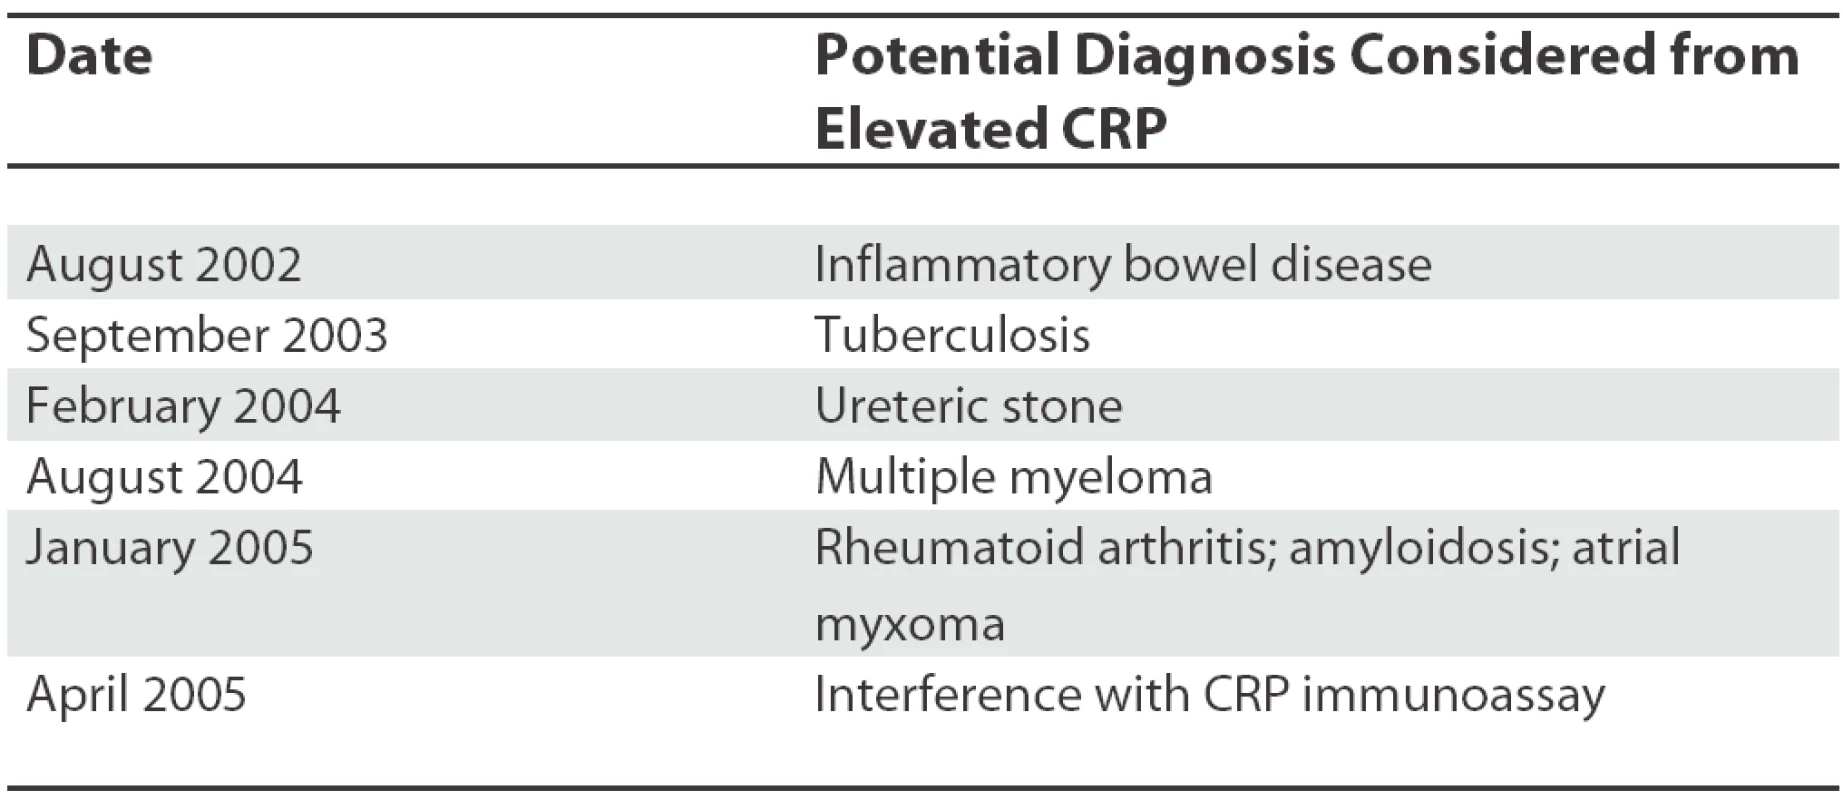 Potential Differential Diagnoses Considered to Explain Elevated CRP